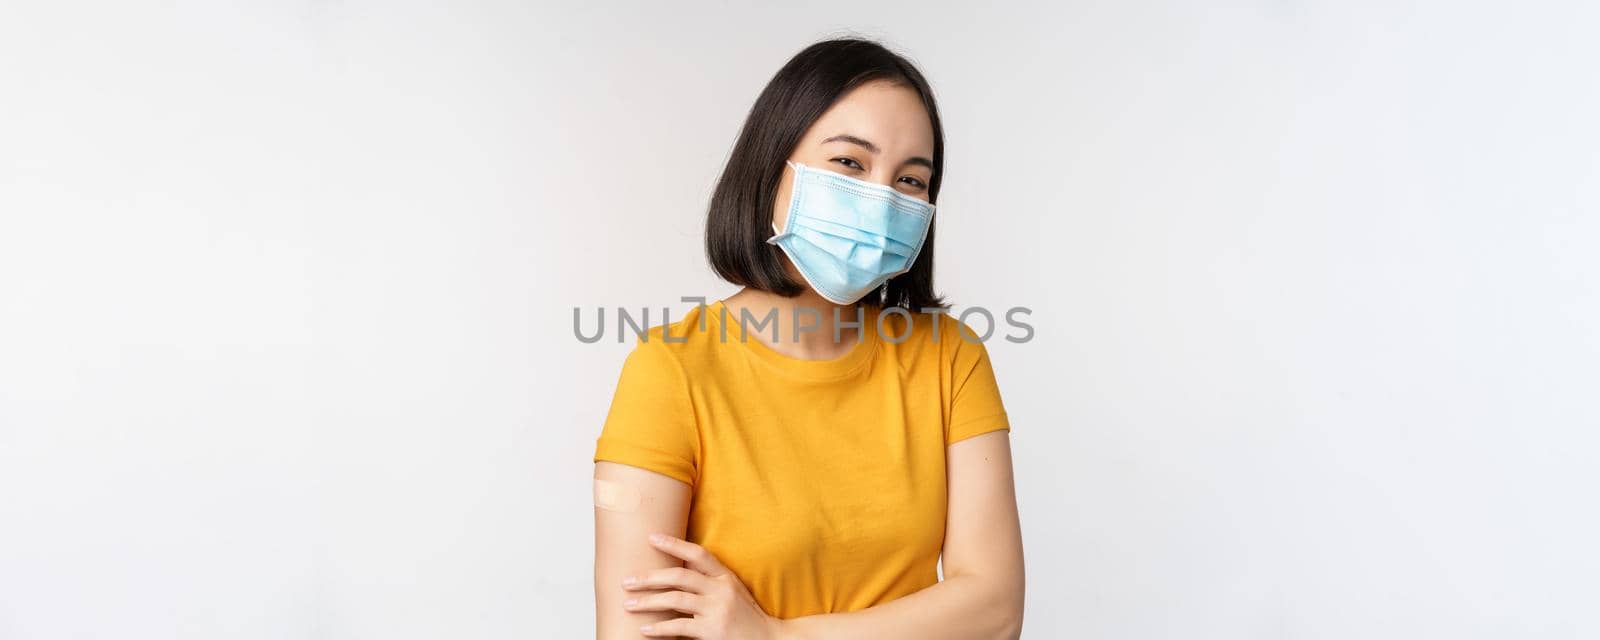 Covid-19, vaccination and healthcare concept. Cute asian girl in medical face mask, holding shoulder with band aid, got vaccine from coronavirus, smiling pleased, white background.